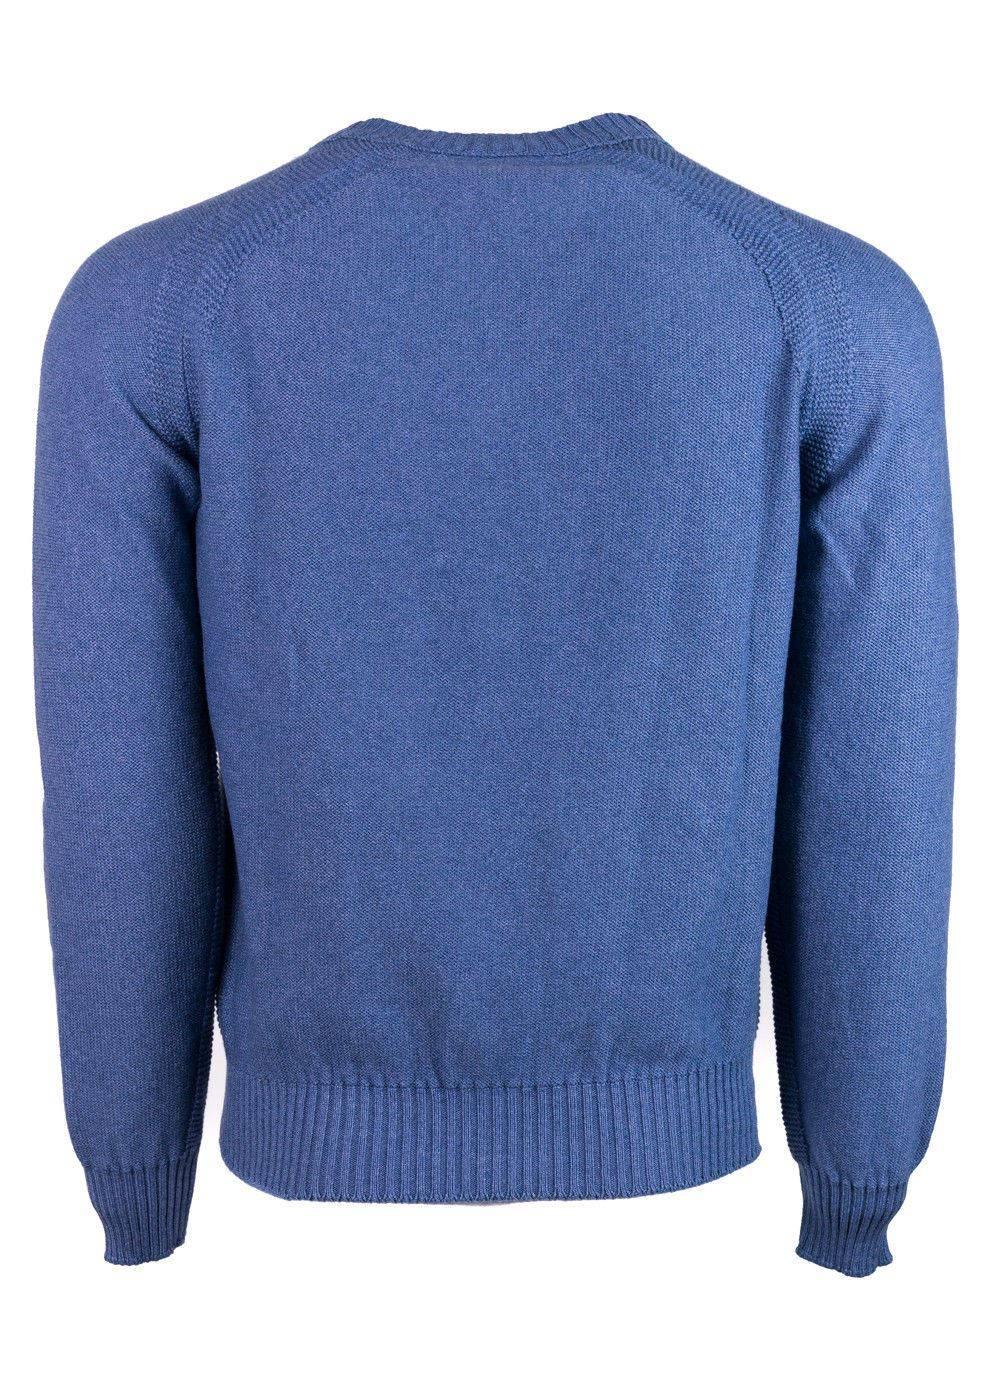 Brand New Tom Ford Raglan Sweater
Original with Tags 
Retails in Stores & Online for $990
Size IT 48 / US38

Cozy up in your Classic Tom Ford Raglan Sweater. This season's luxury piece was designed using rich cotton, smooth cashmere, and mulberry